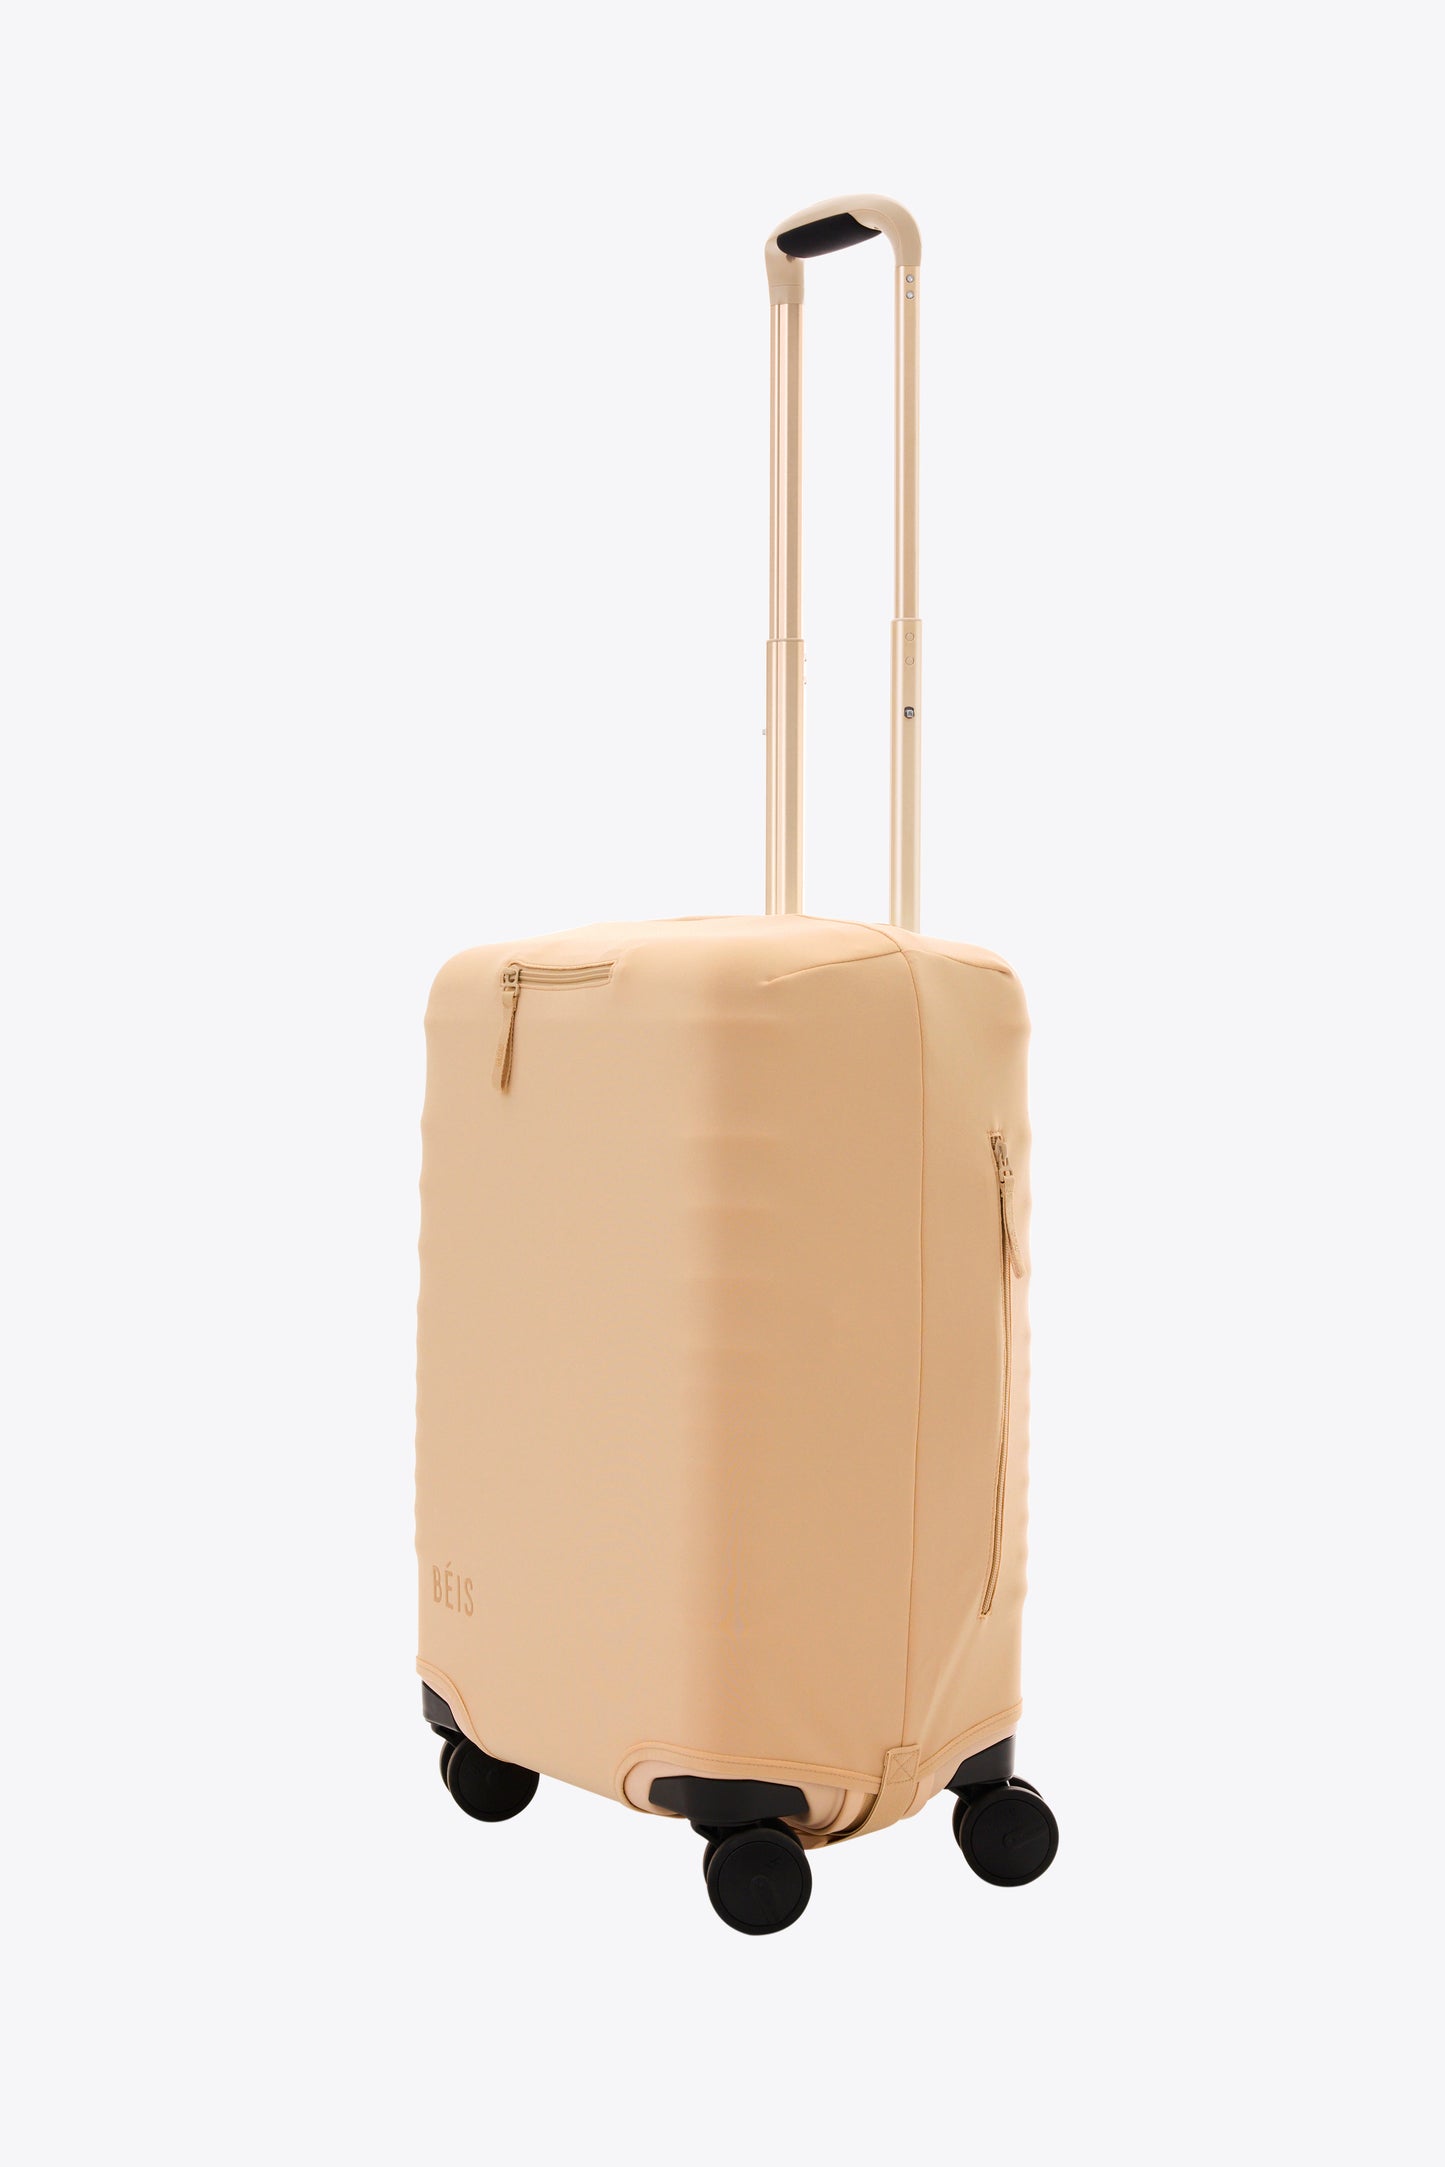 The Carry-On Luggage Cover in Beige